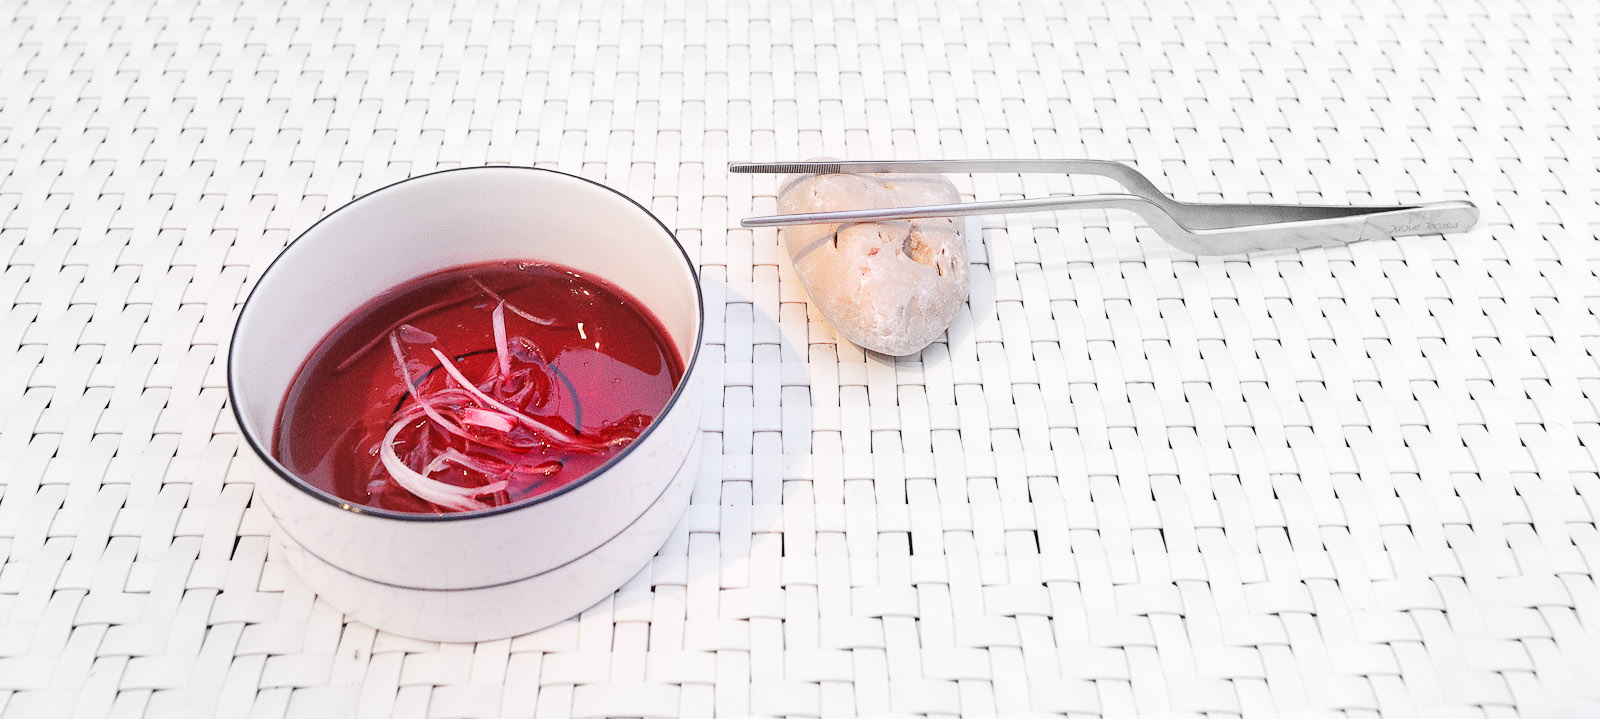 Amuse bouche: Cold tea, chicory and hibiscus